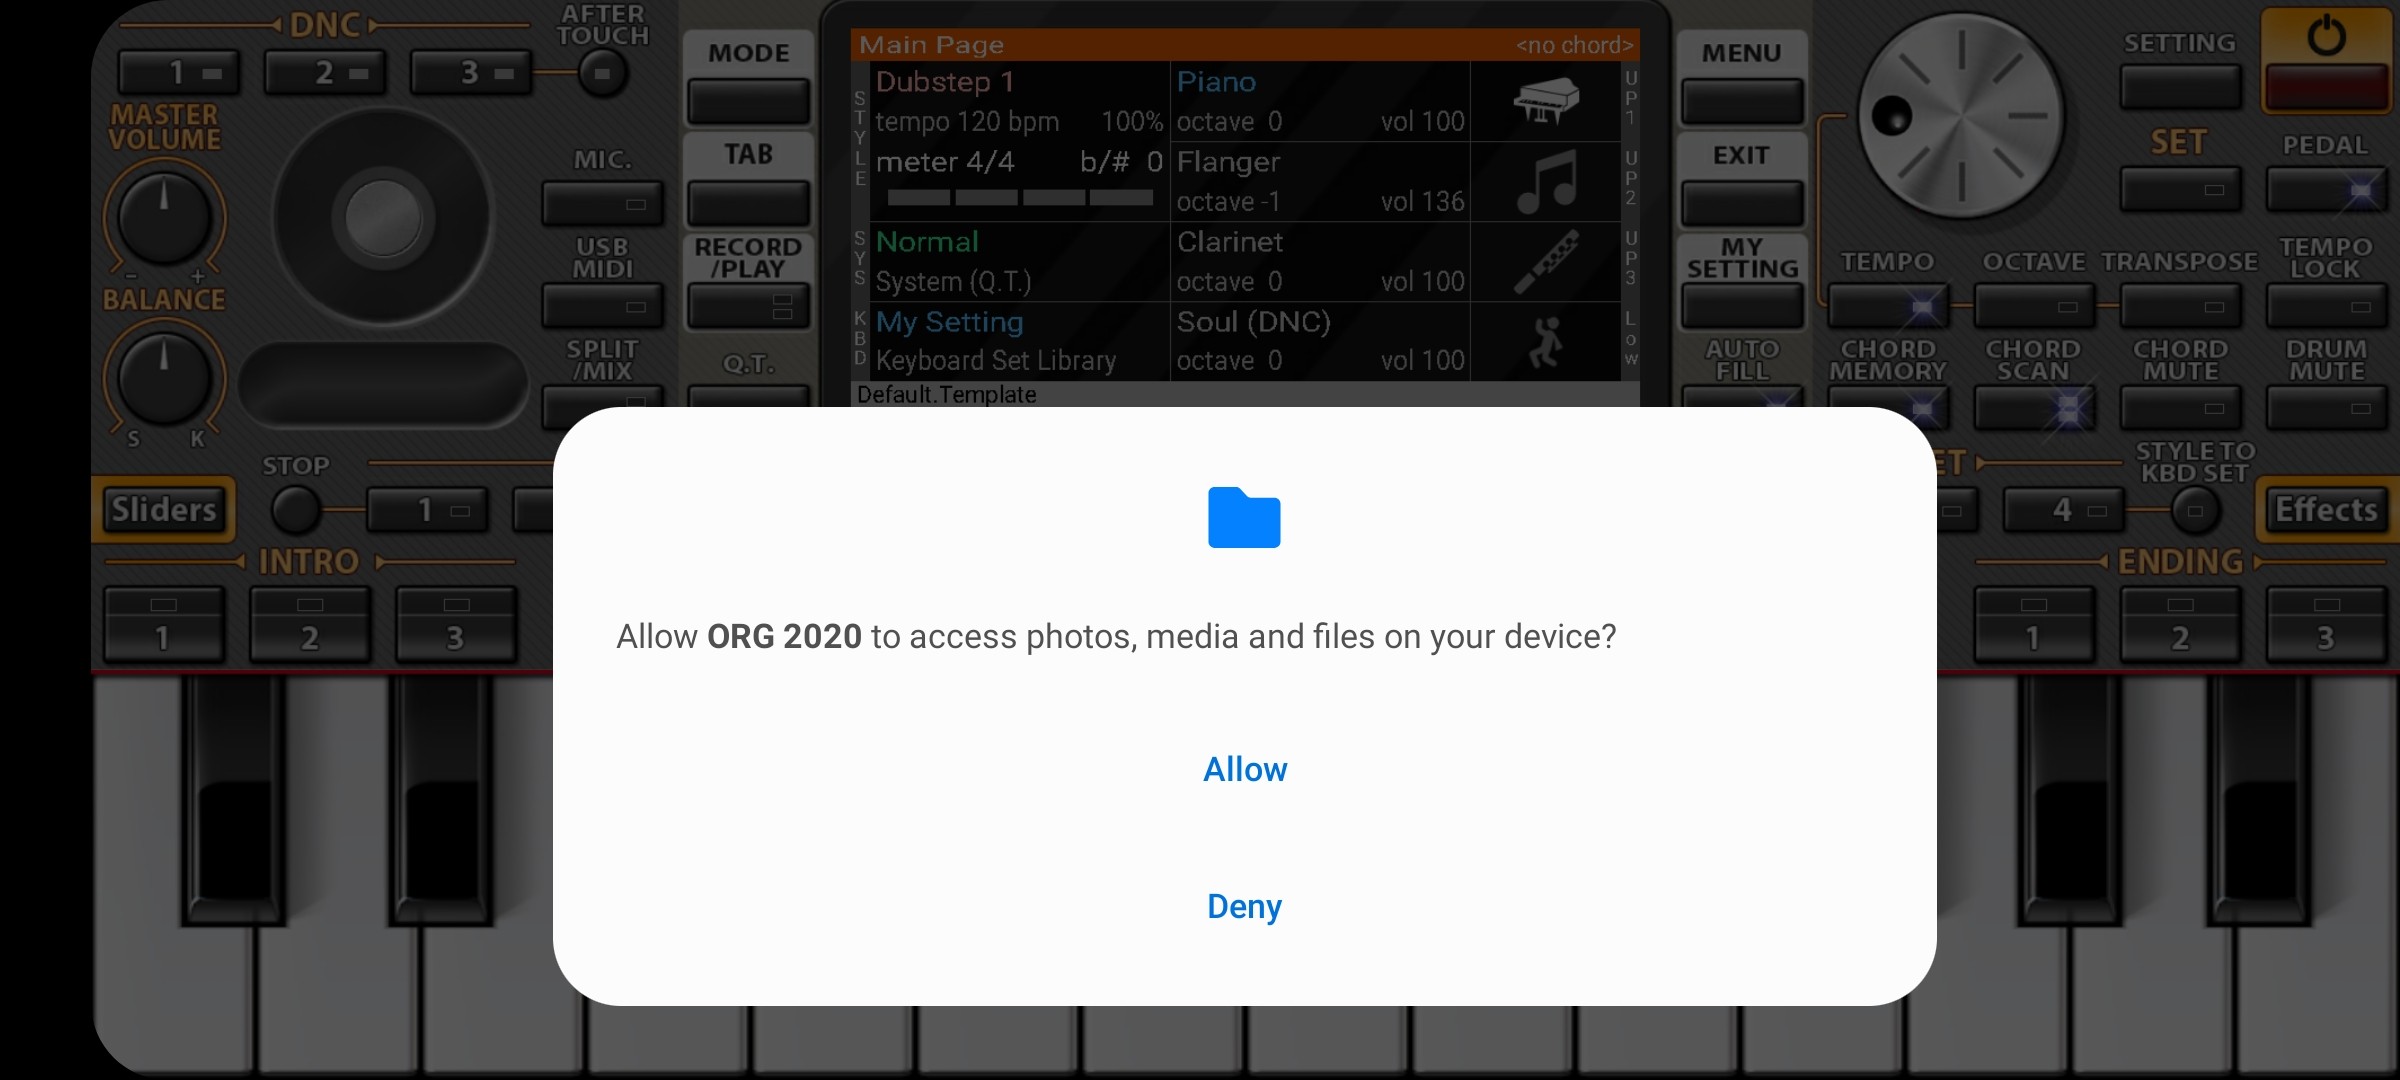 ORG 2017 Apk Free Download For Android | APKOLL